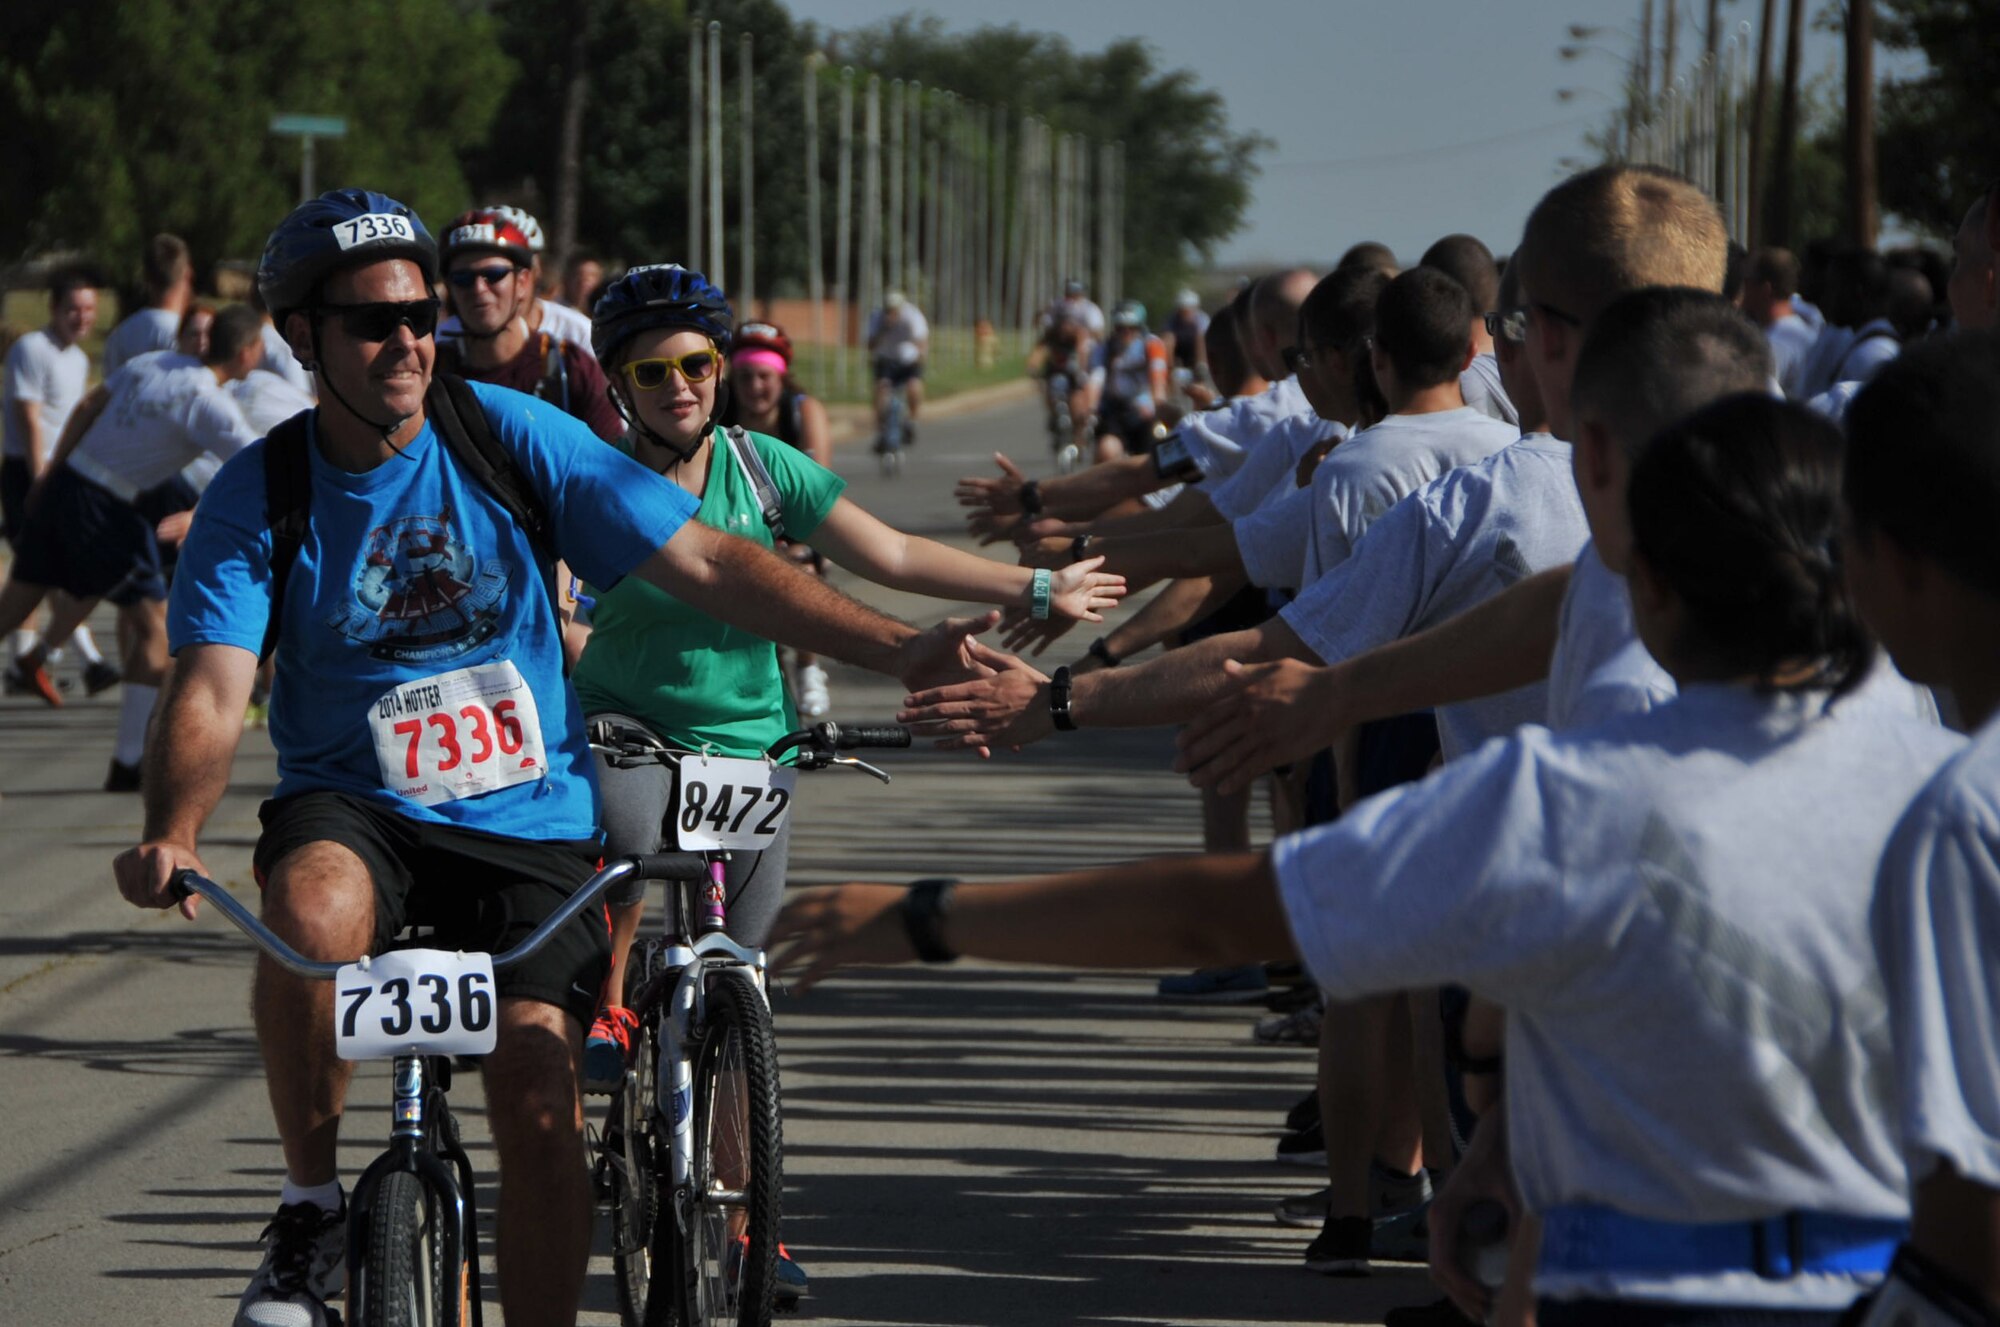 Brig. Gen. Scott Kindsvater, 82nd Training Wing Commander, exchanges high-fives with Airmen-in-Training as he passes through Airmen’s Alley during the Hotter’N Hell bike race Aug. 23, 2014. Airmen’s Alley was filled with hundreds of AiT’s from different training Squadrons who cheered on the thousands of bikers riding through Sheppard Air Force Base, Texas. (U.S. Air Force photo/Airman 1st Class Robert L. McIlrath)